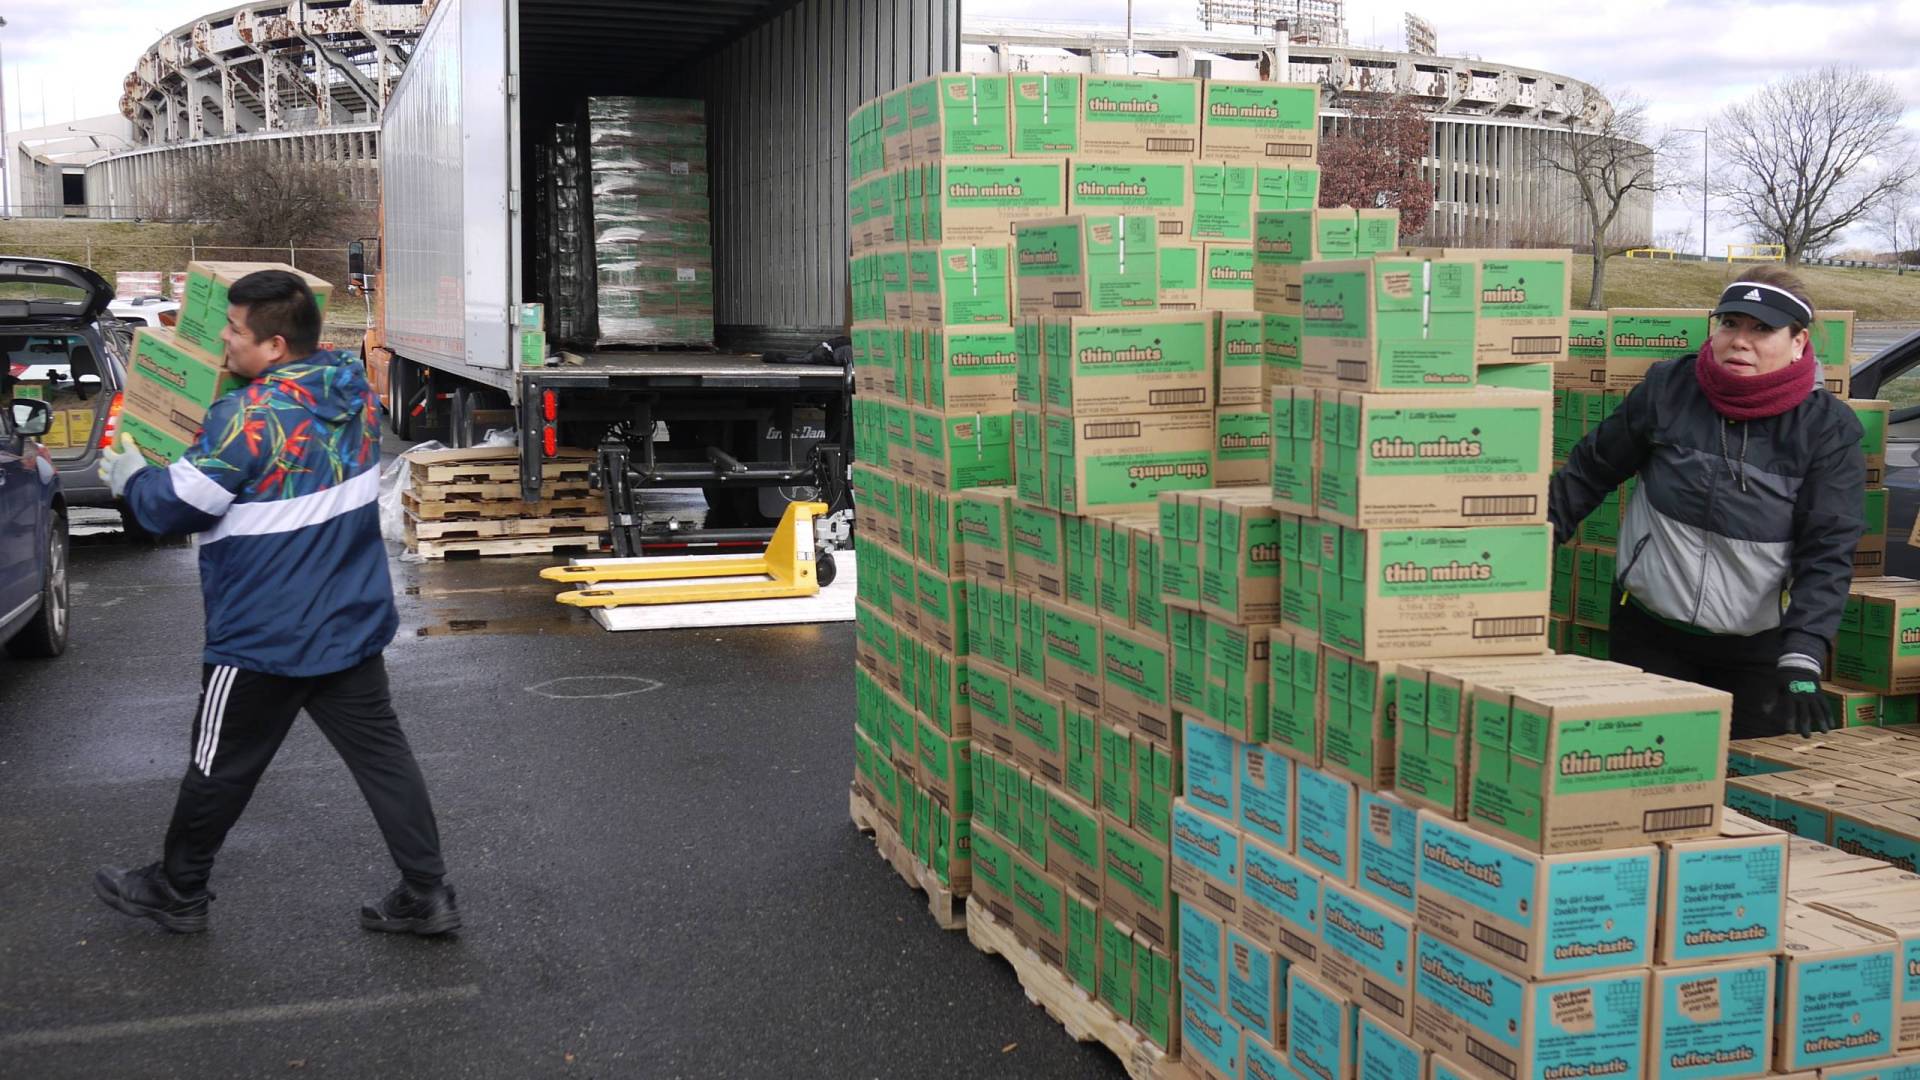 A man carries a pile of green and brown boxes to a vehicle, while a woman dressed for winter stands behind a wall of the same boxes.